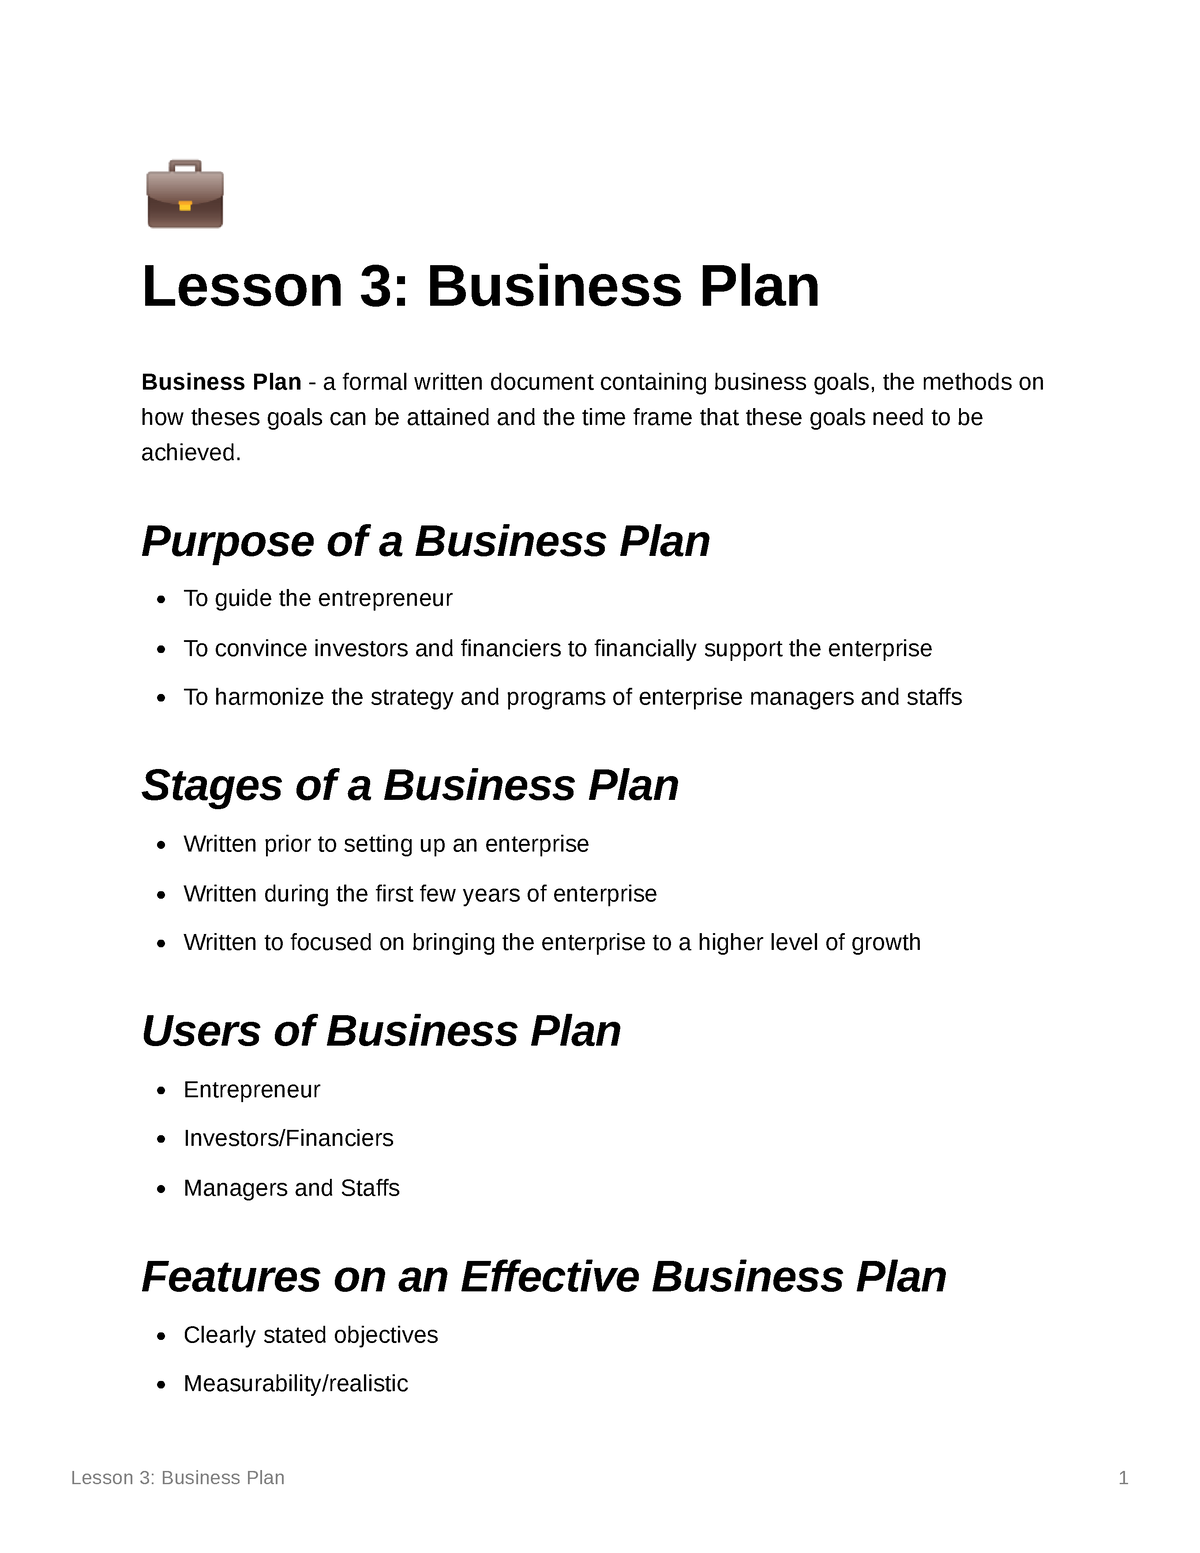 the first part of the formal business plan is